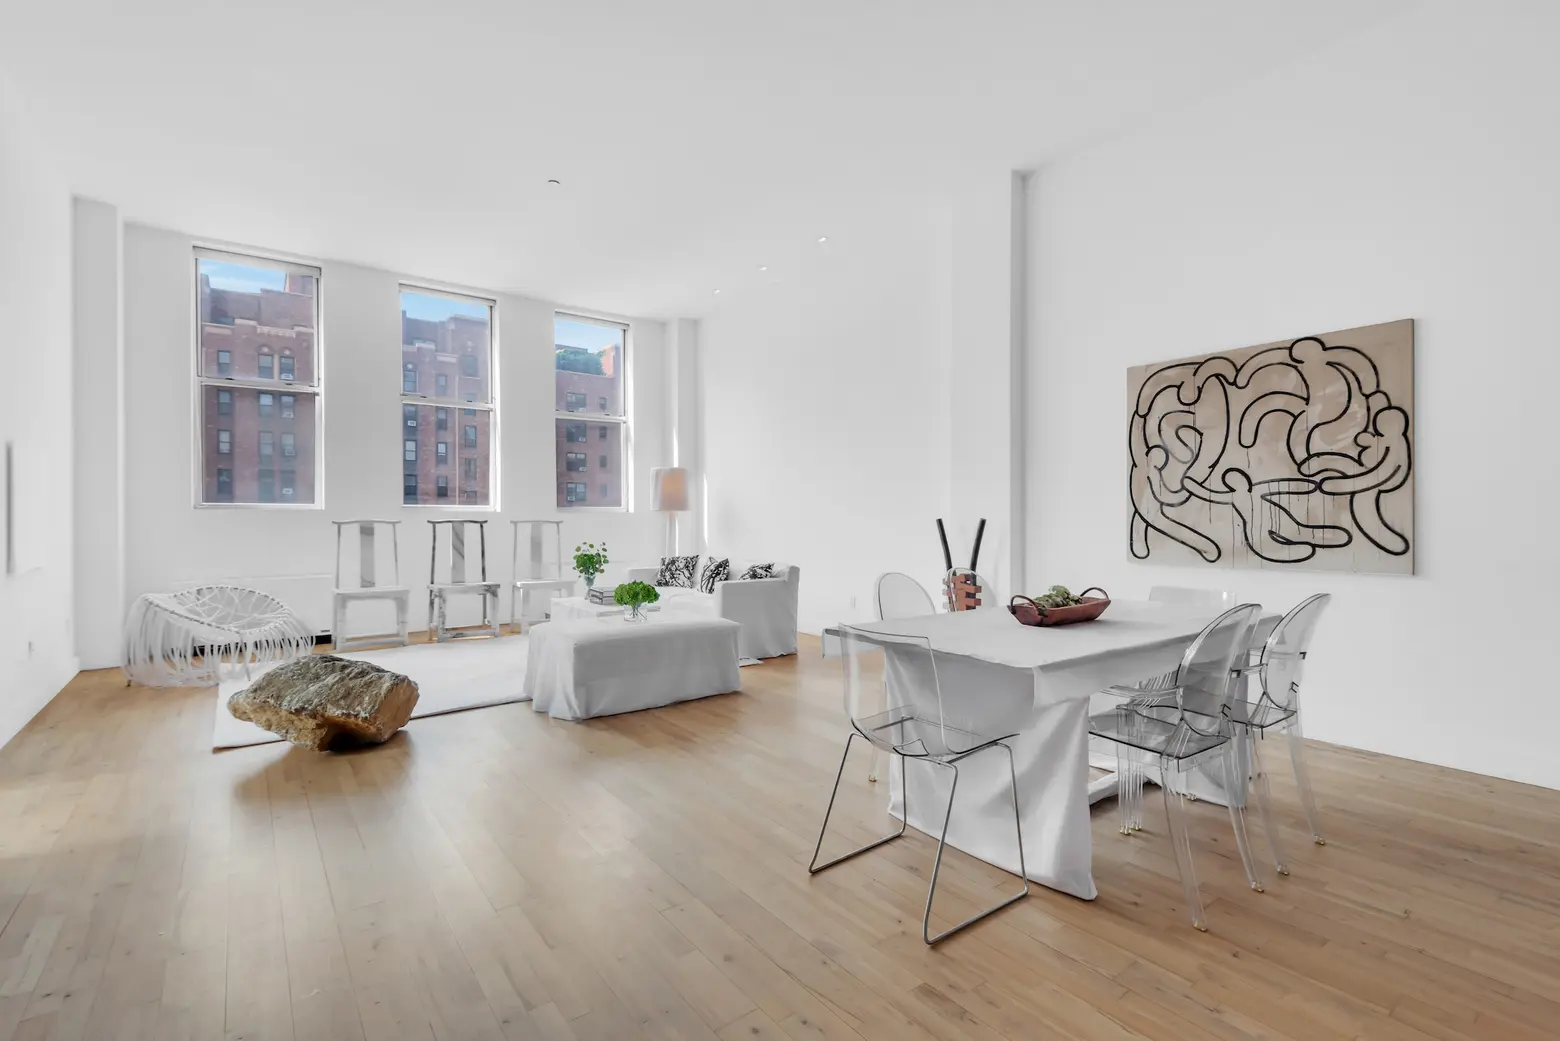 Artist Ai Weiwei lists Chelsea condo for $2M